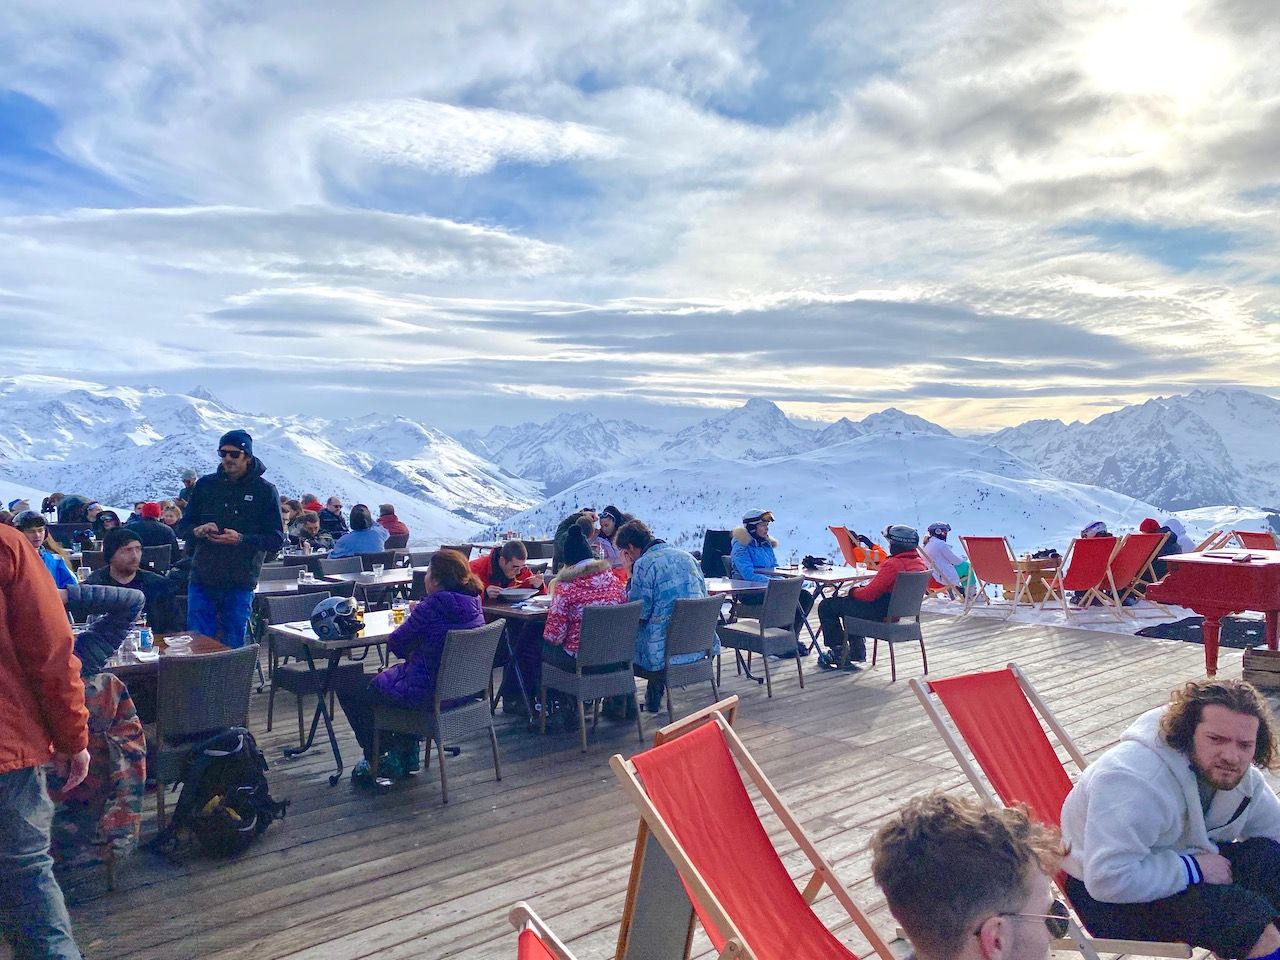 lunch on a deck at an all-inclusive ski resort 